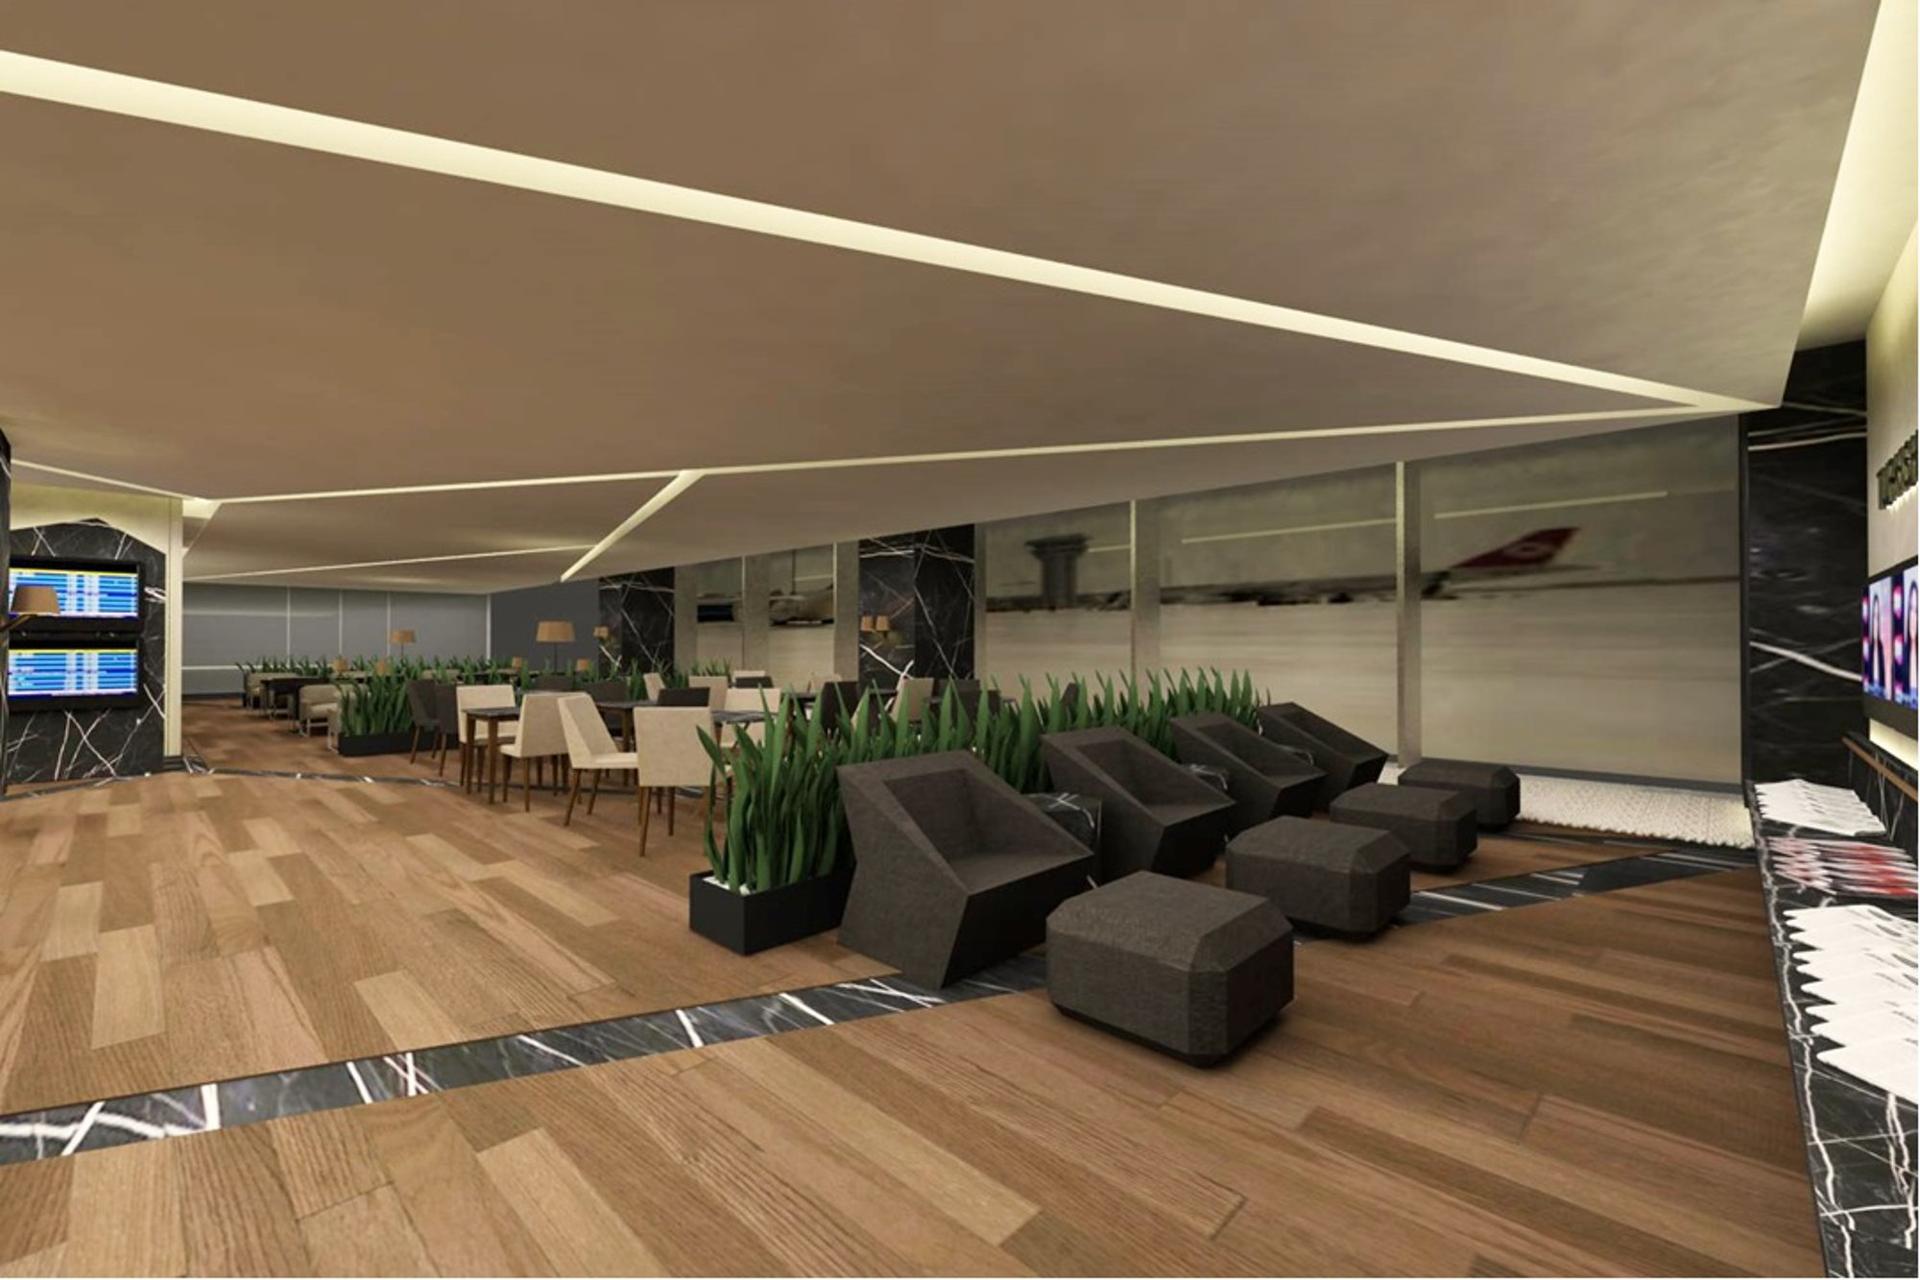 Turkish Airlines CIP Lounge (Business Lounge) image 10 of 27